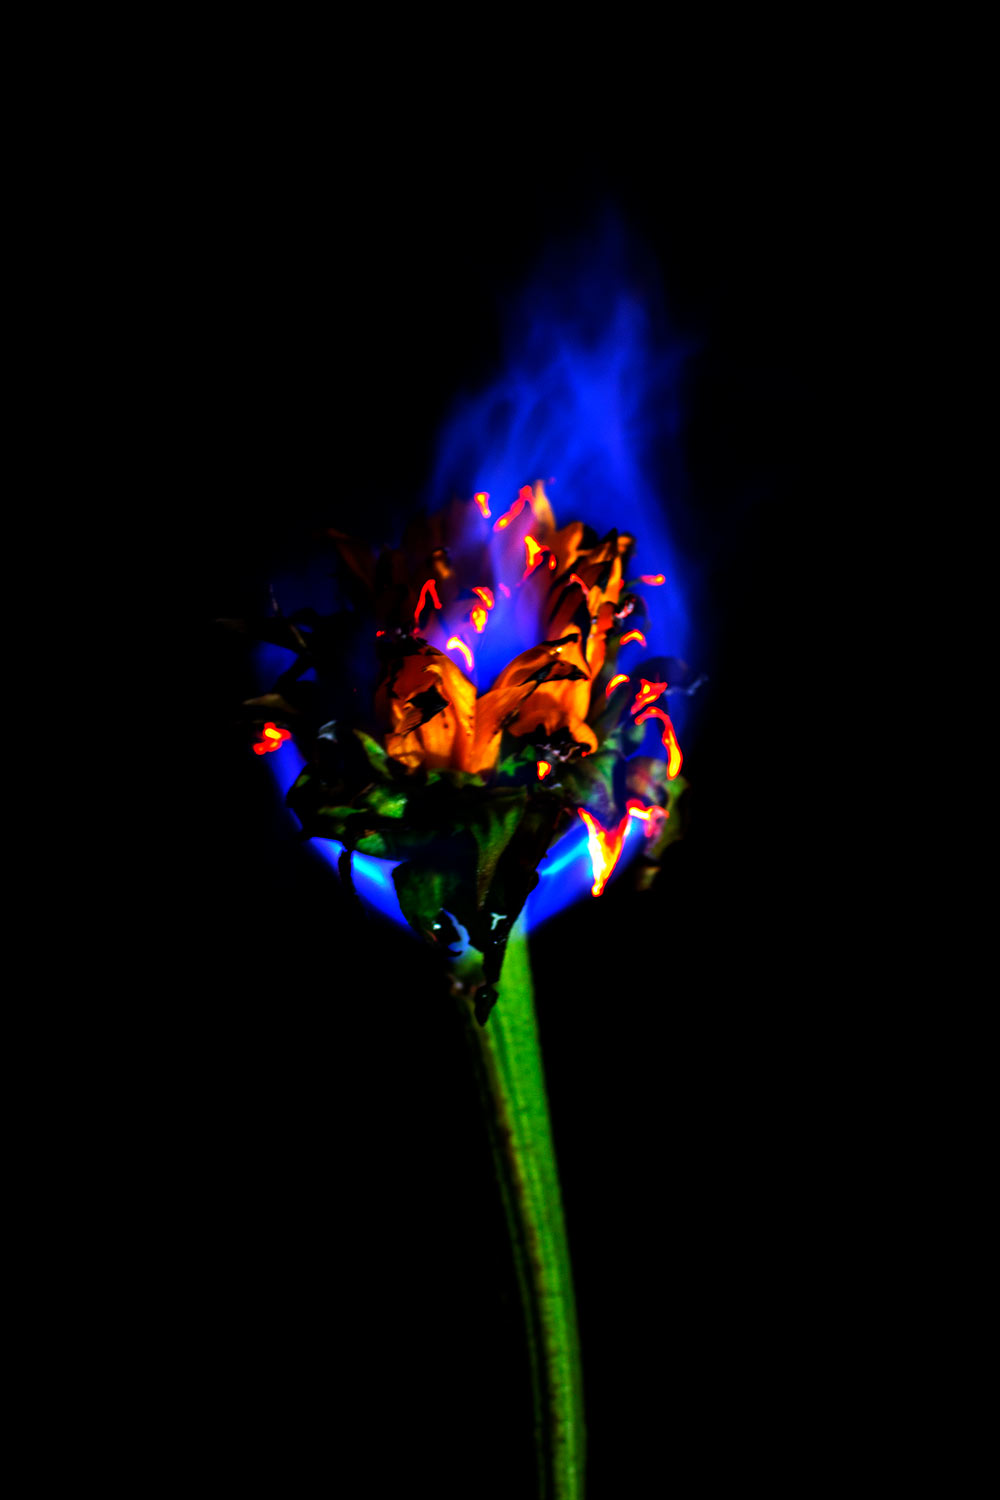 orange flower on fire with blue flame on black background